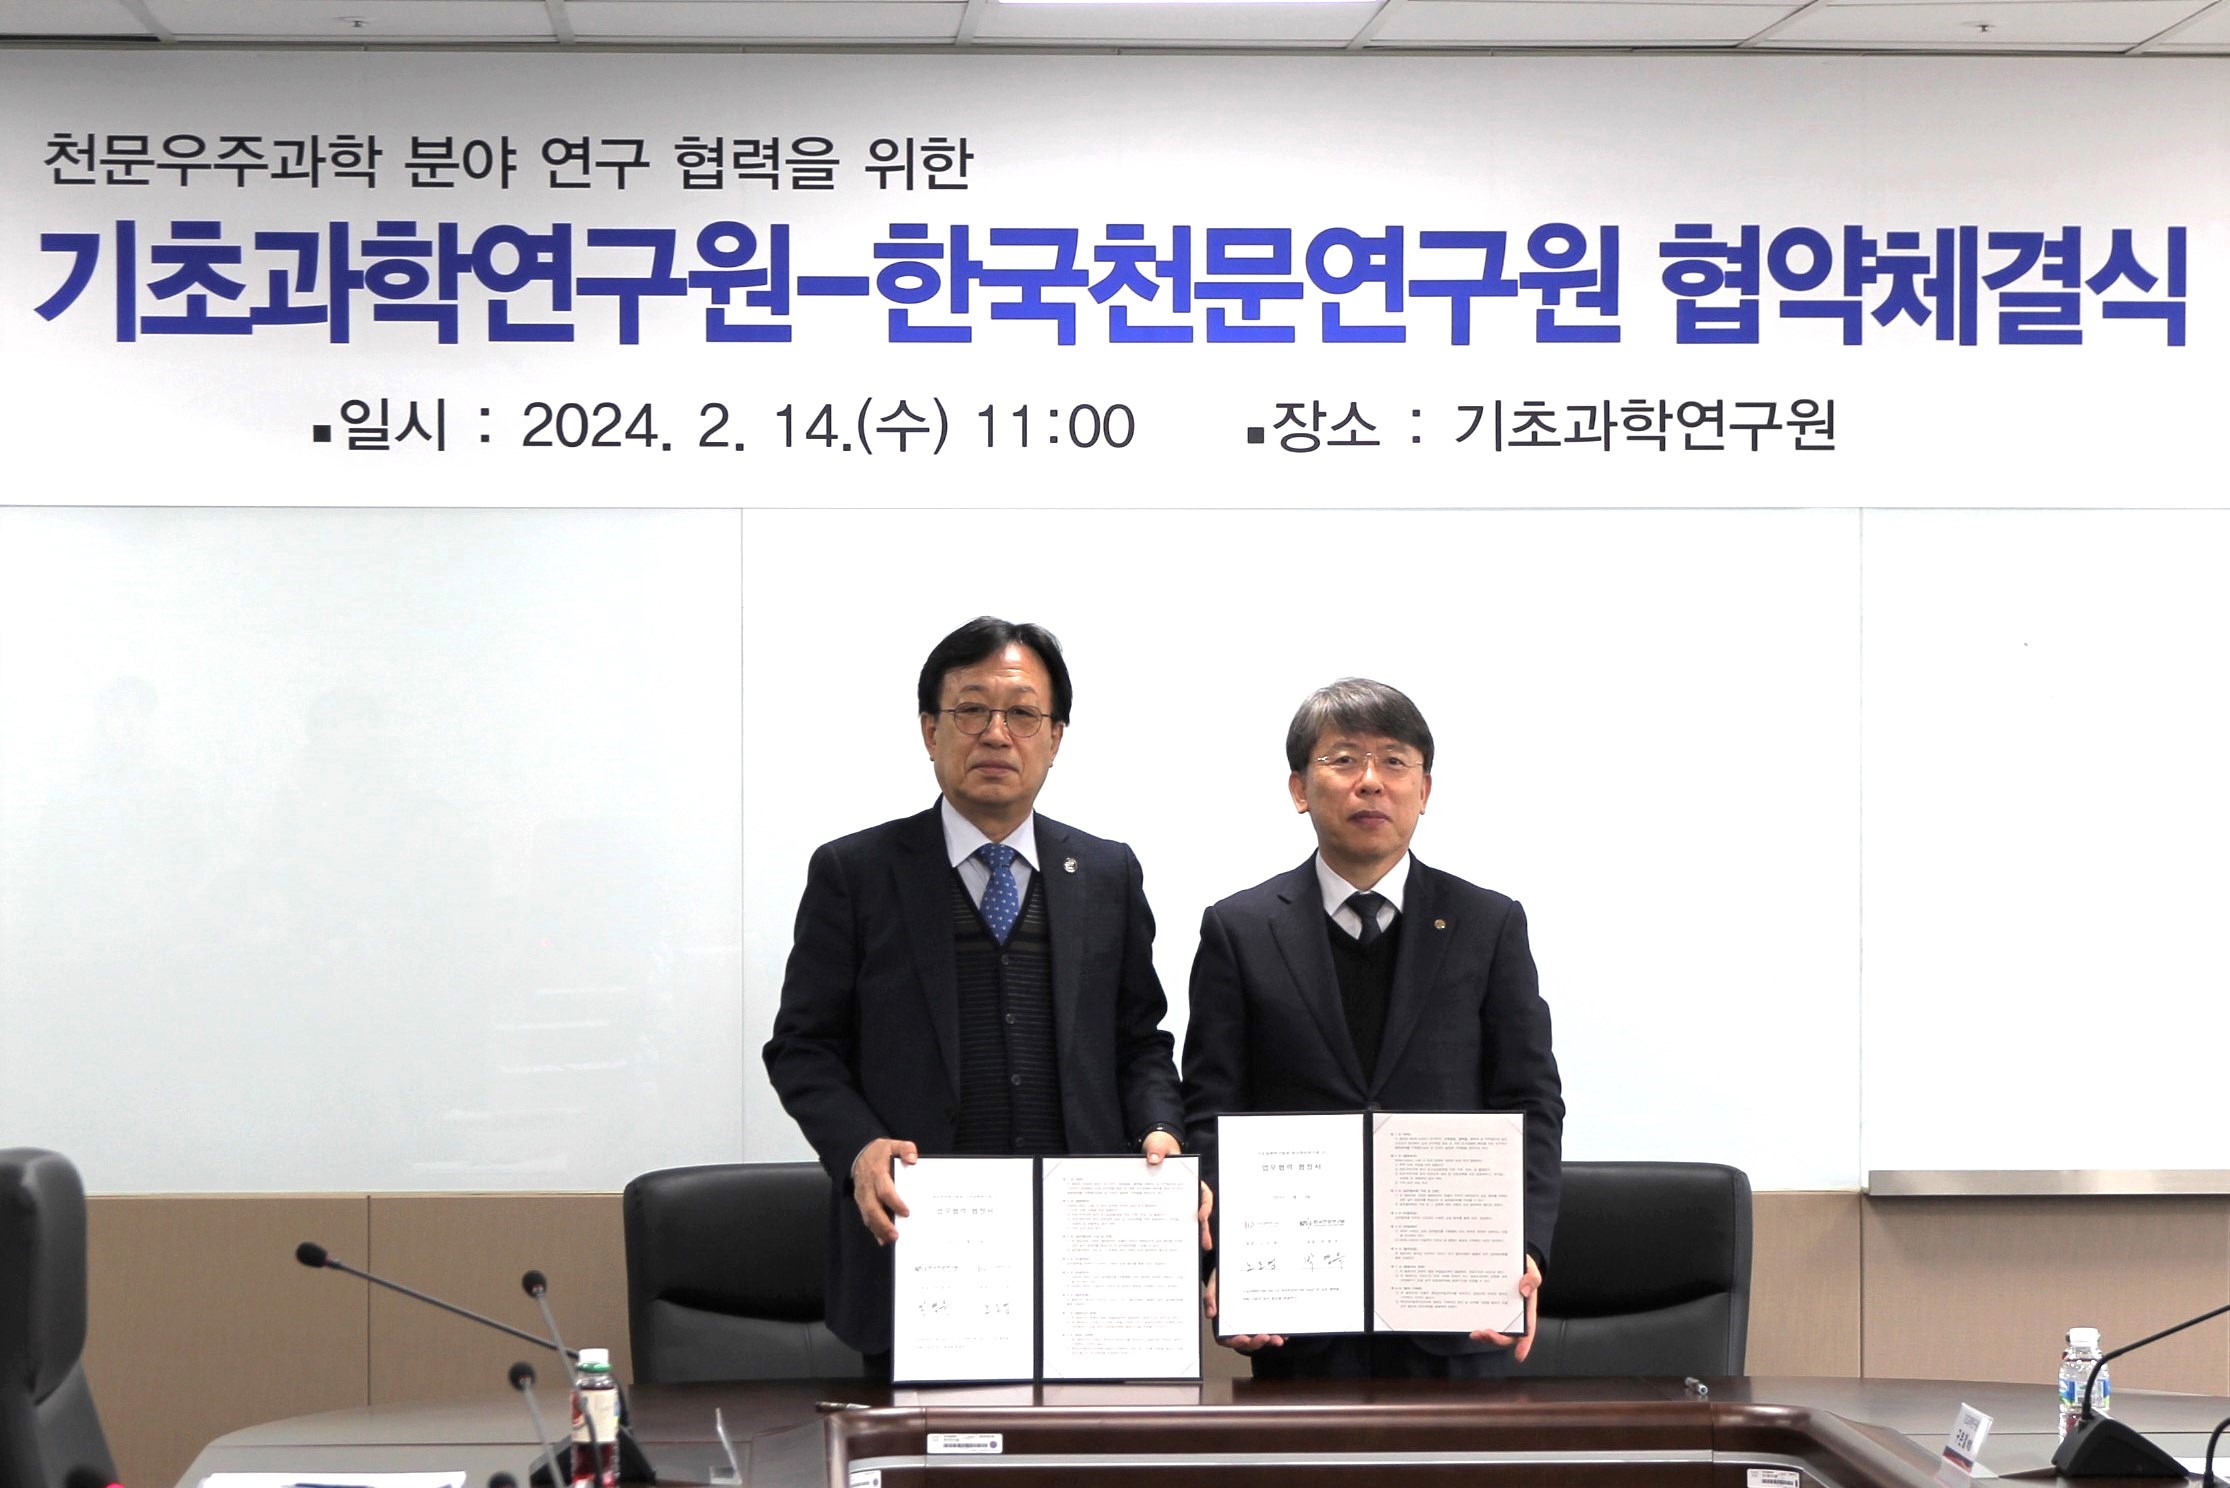 ▲ ▲IBS and KASI signed MOU for collaboration in astronomy and space sciences on February 14th. Right: IBS President NOH Do Young, Left: KASI President PARK Young Deuk 